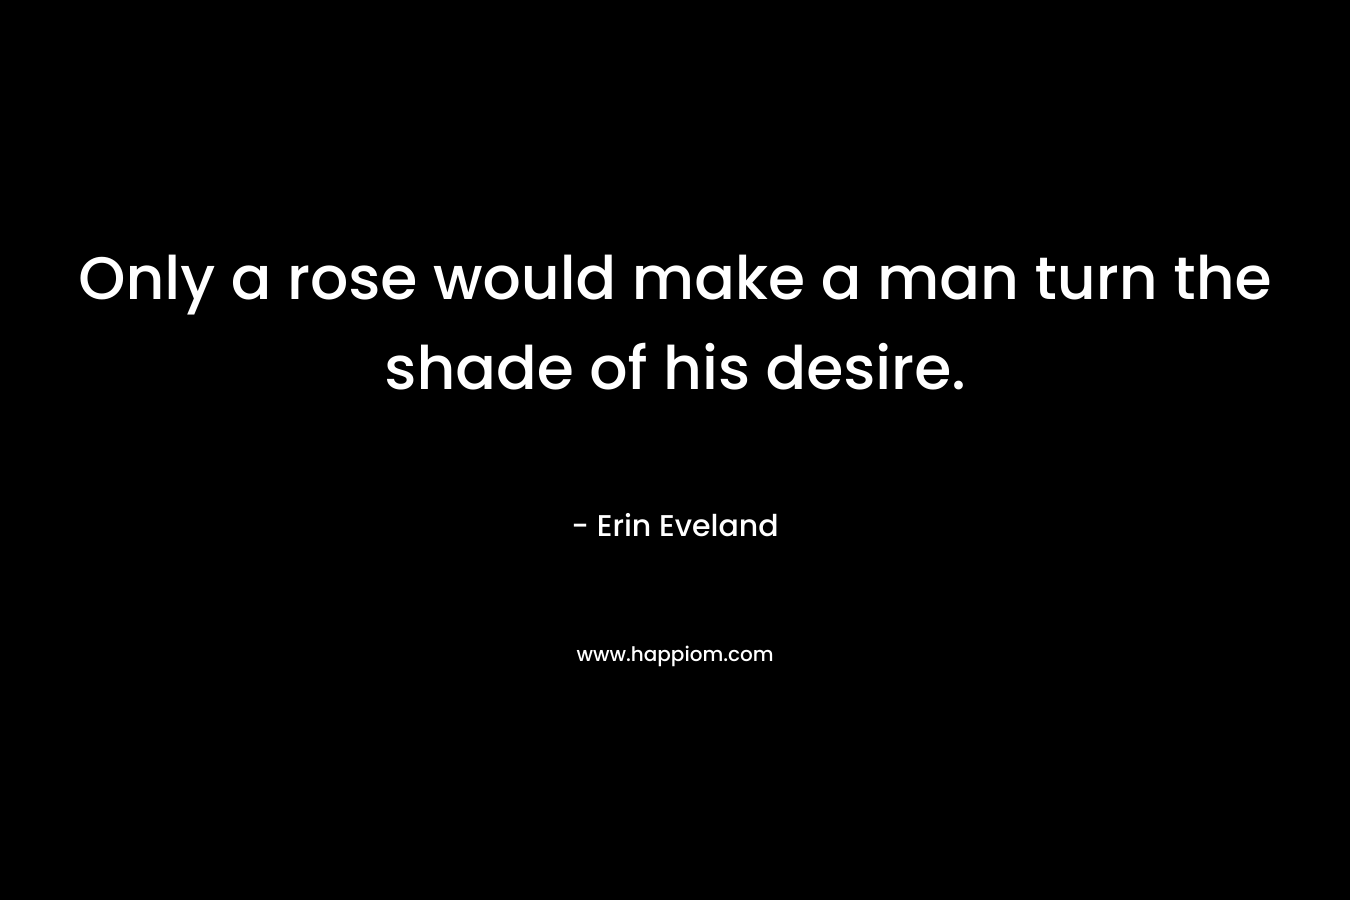 Only a rose would make a man turn the shade of his desire.